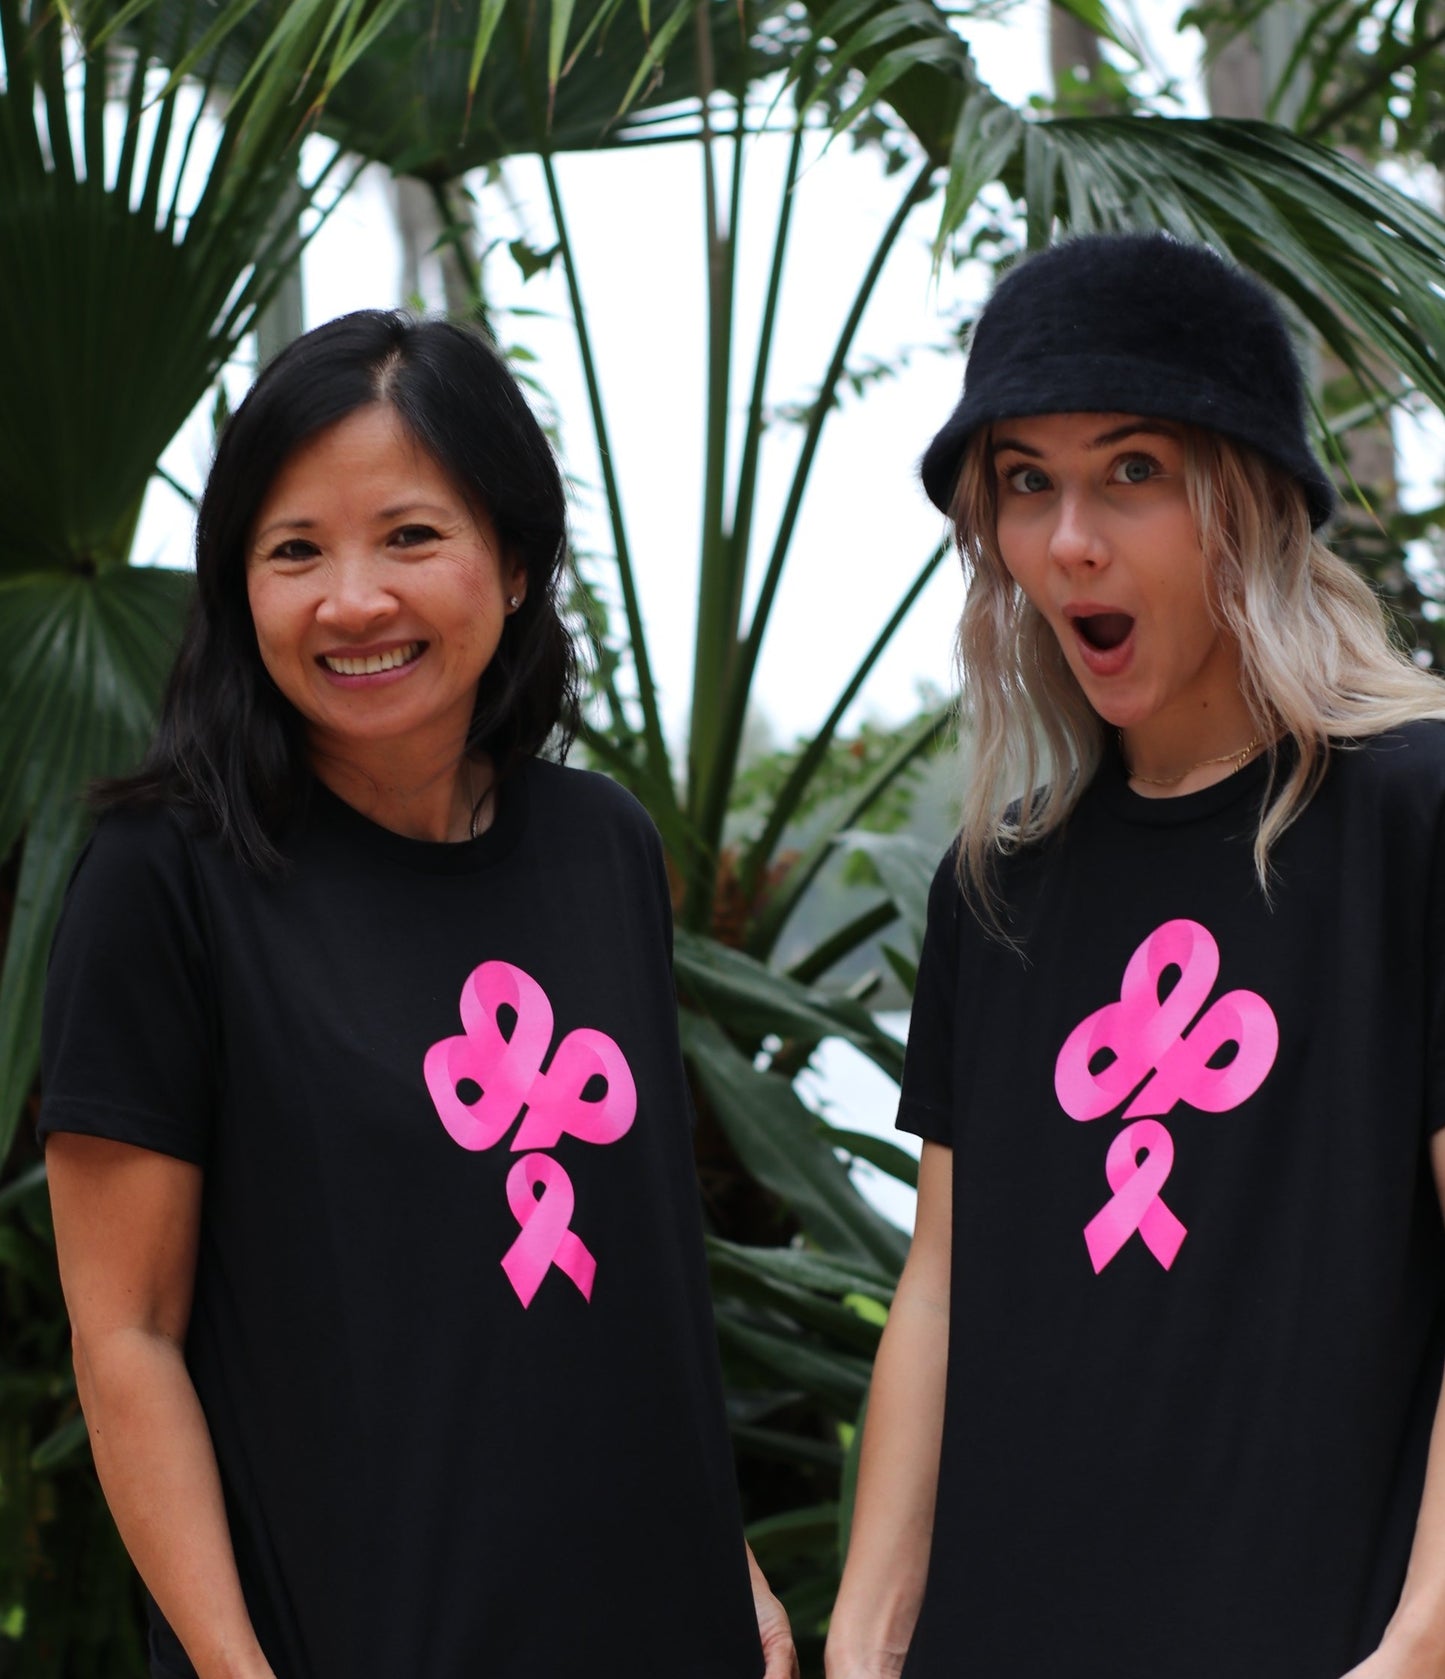 Help Fight Breast Cancer with the purchase of the IBP Ireland Boys pink ribbon logo on black nextlevel t-shirt worn by Morgan and IBM of Ireland Boys Productions